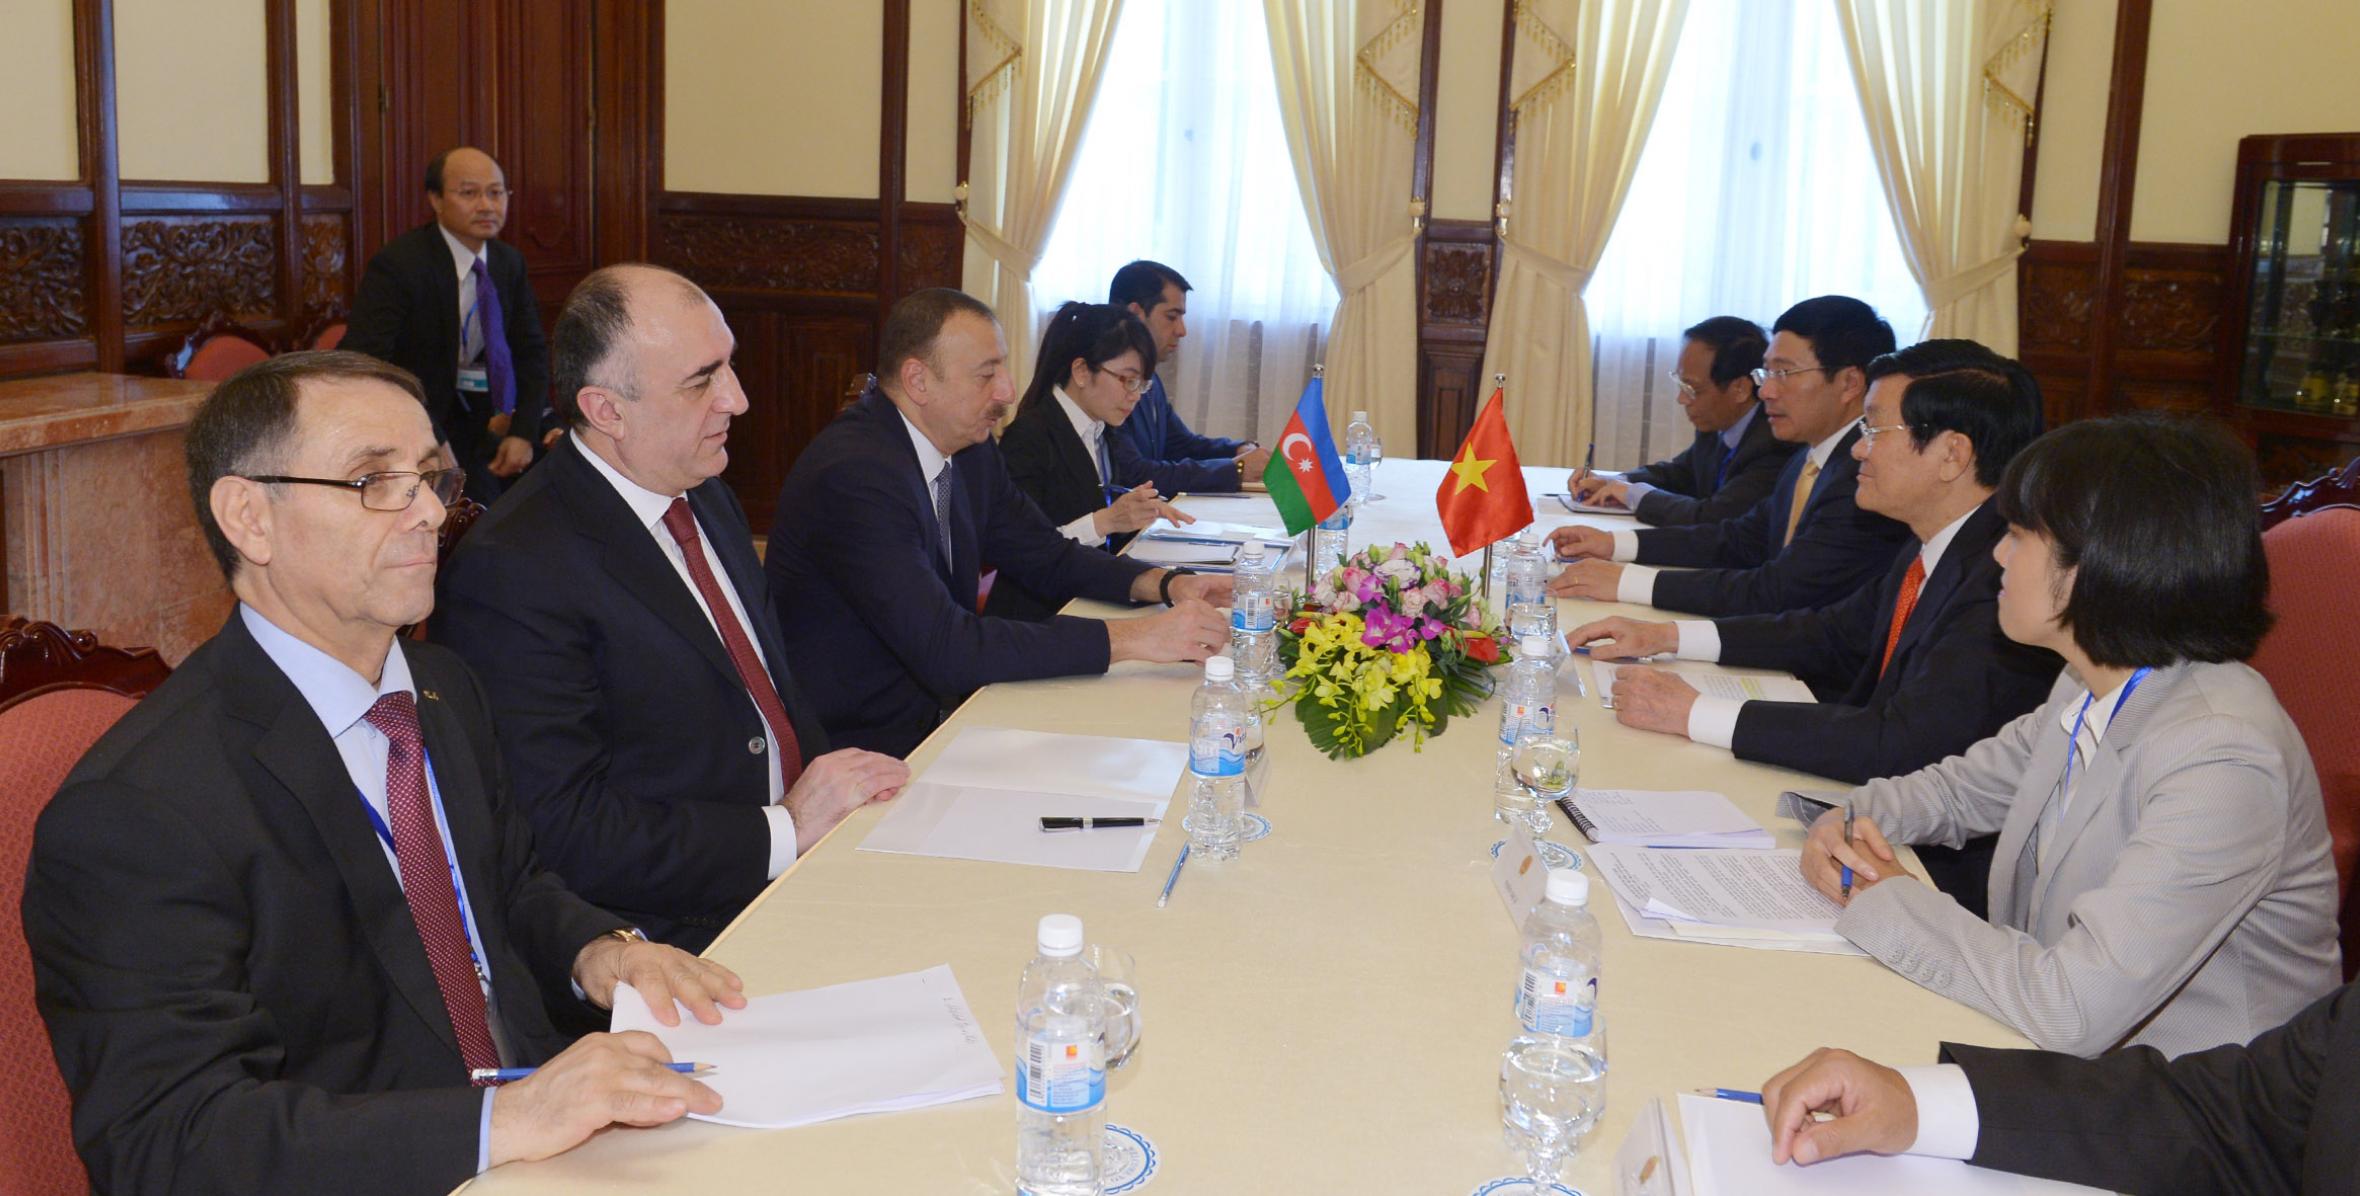 Ilham Aliyev and President of the Socialist Republic of Vietnam Truong Tan Sang held a meeting in a limited format